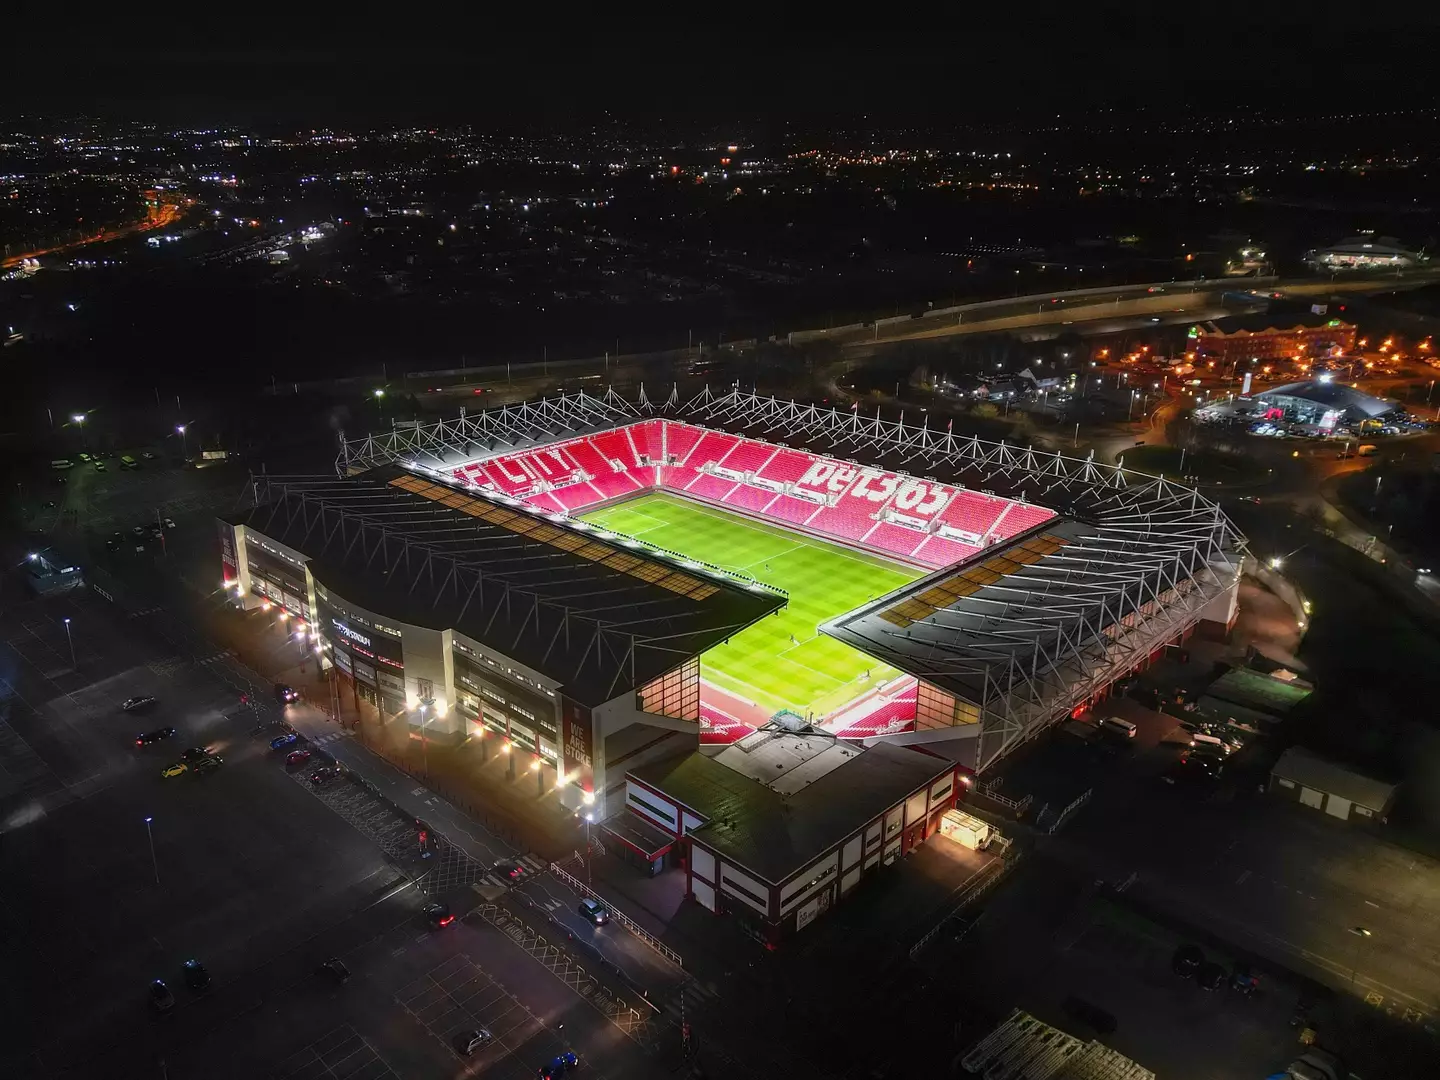 The Bet365 Stadium has sounded like an almost mythical place in the hypothetical scenarios. Image: Alamy